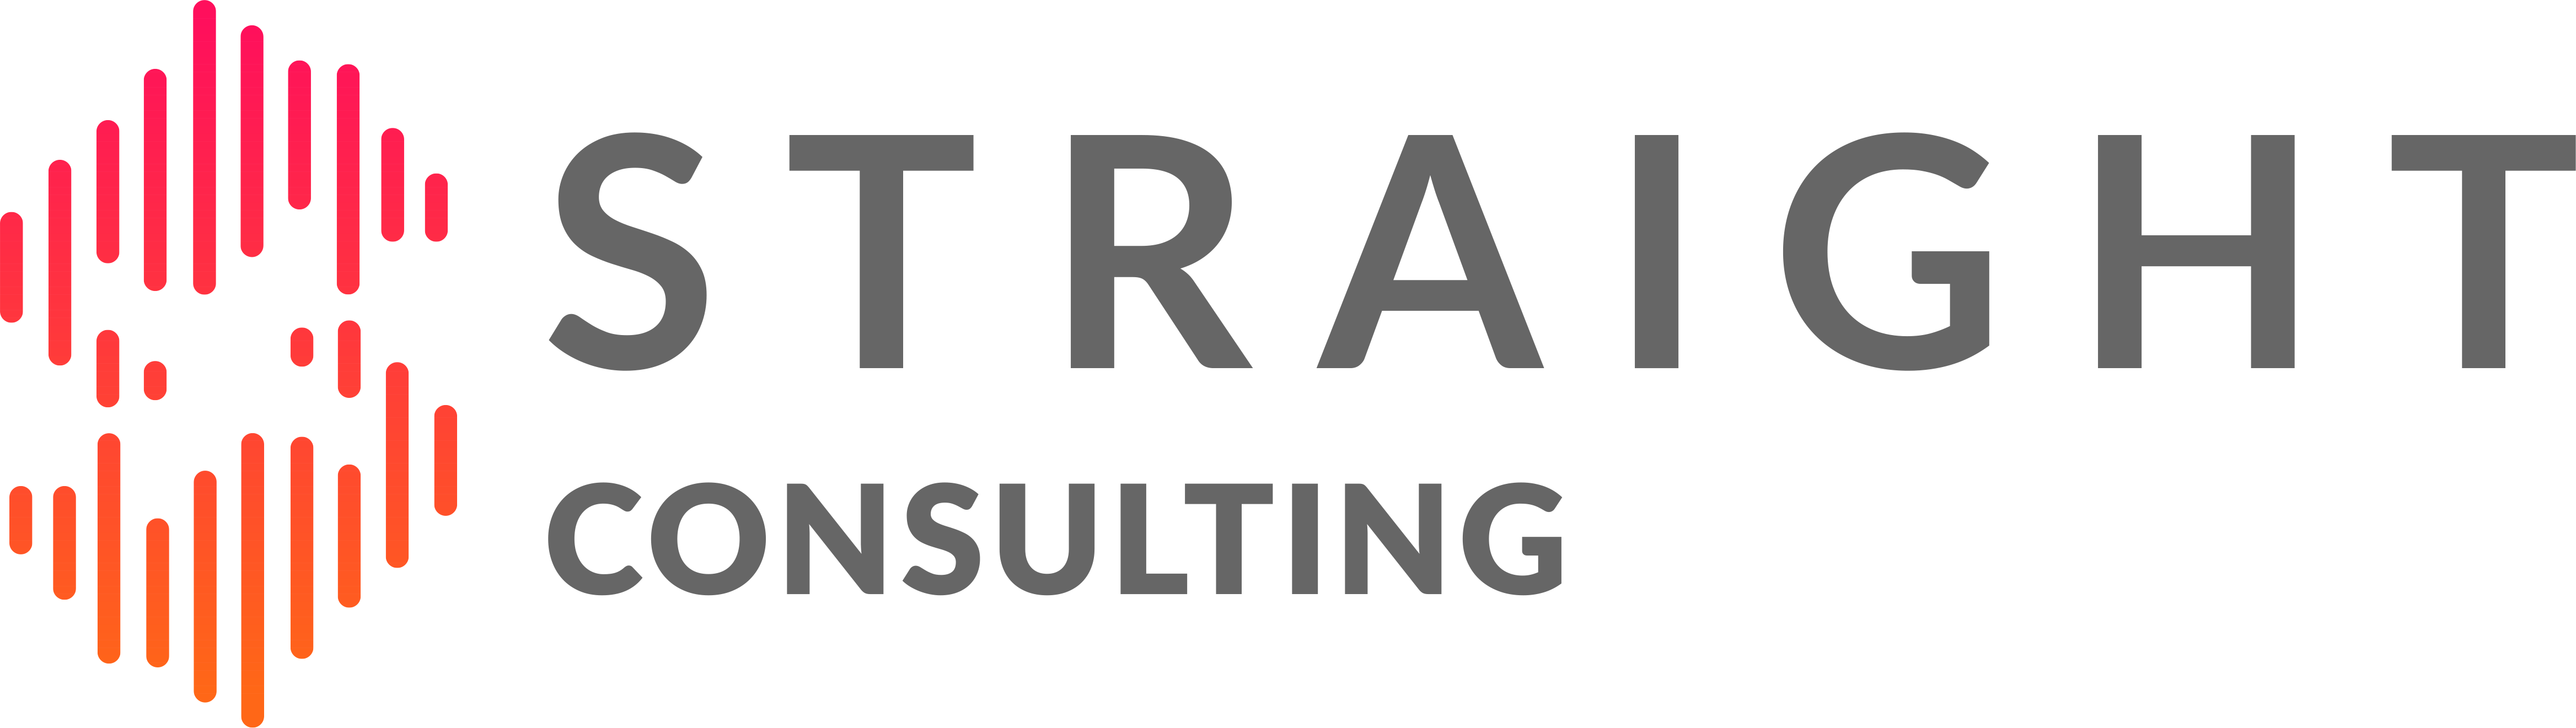 Straight Consulting - logo (landscape)